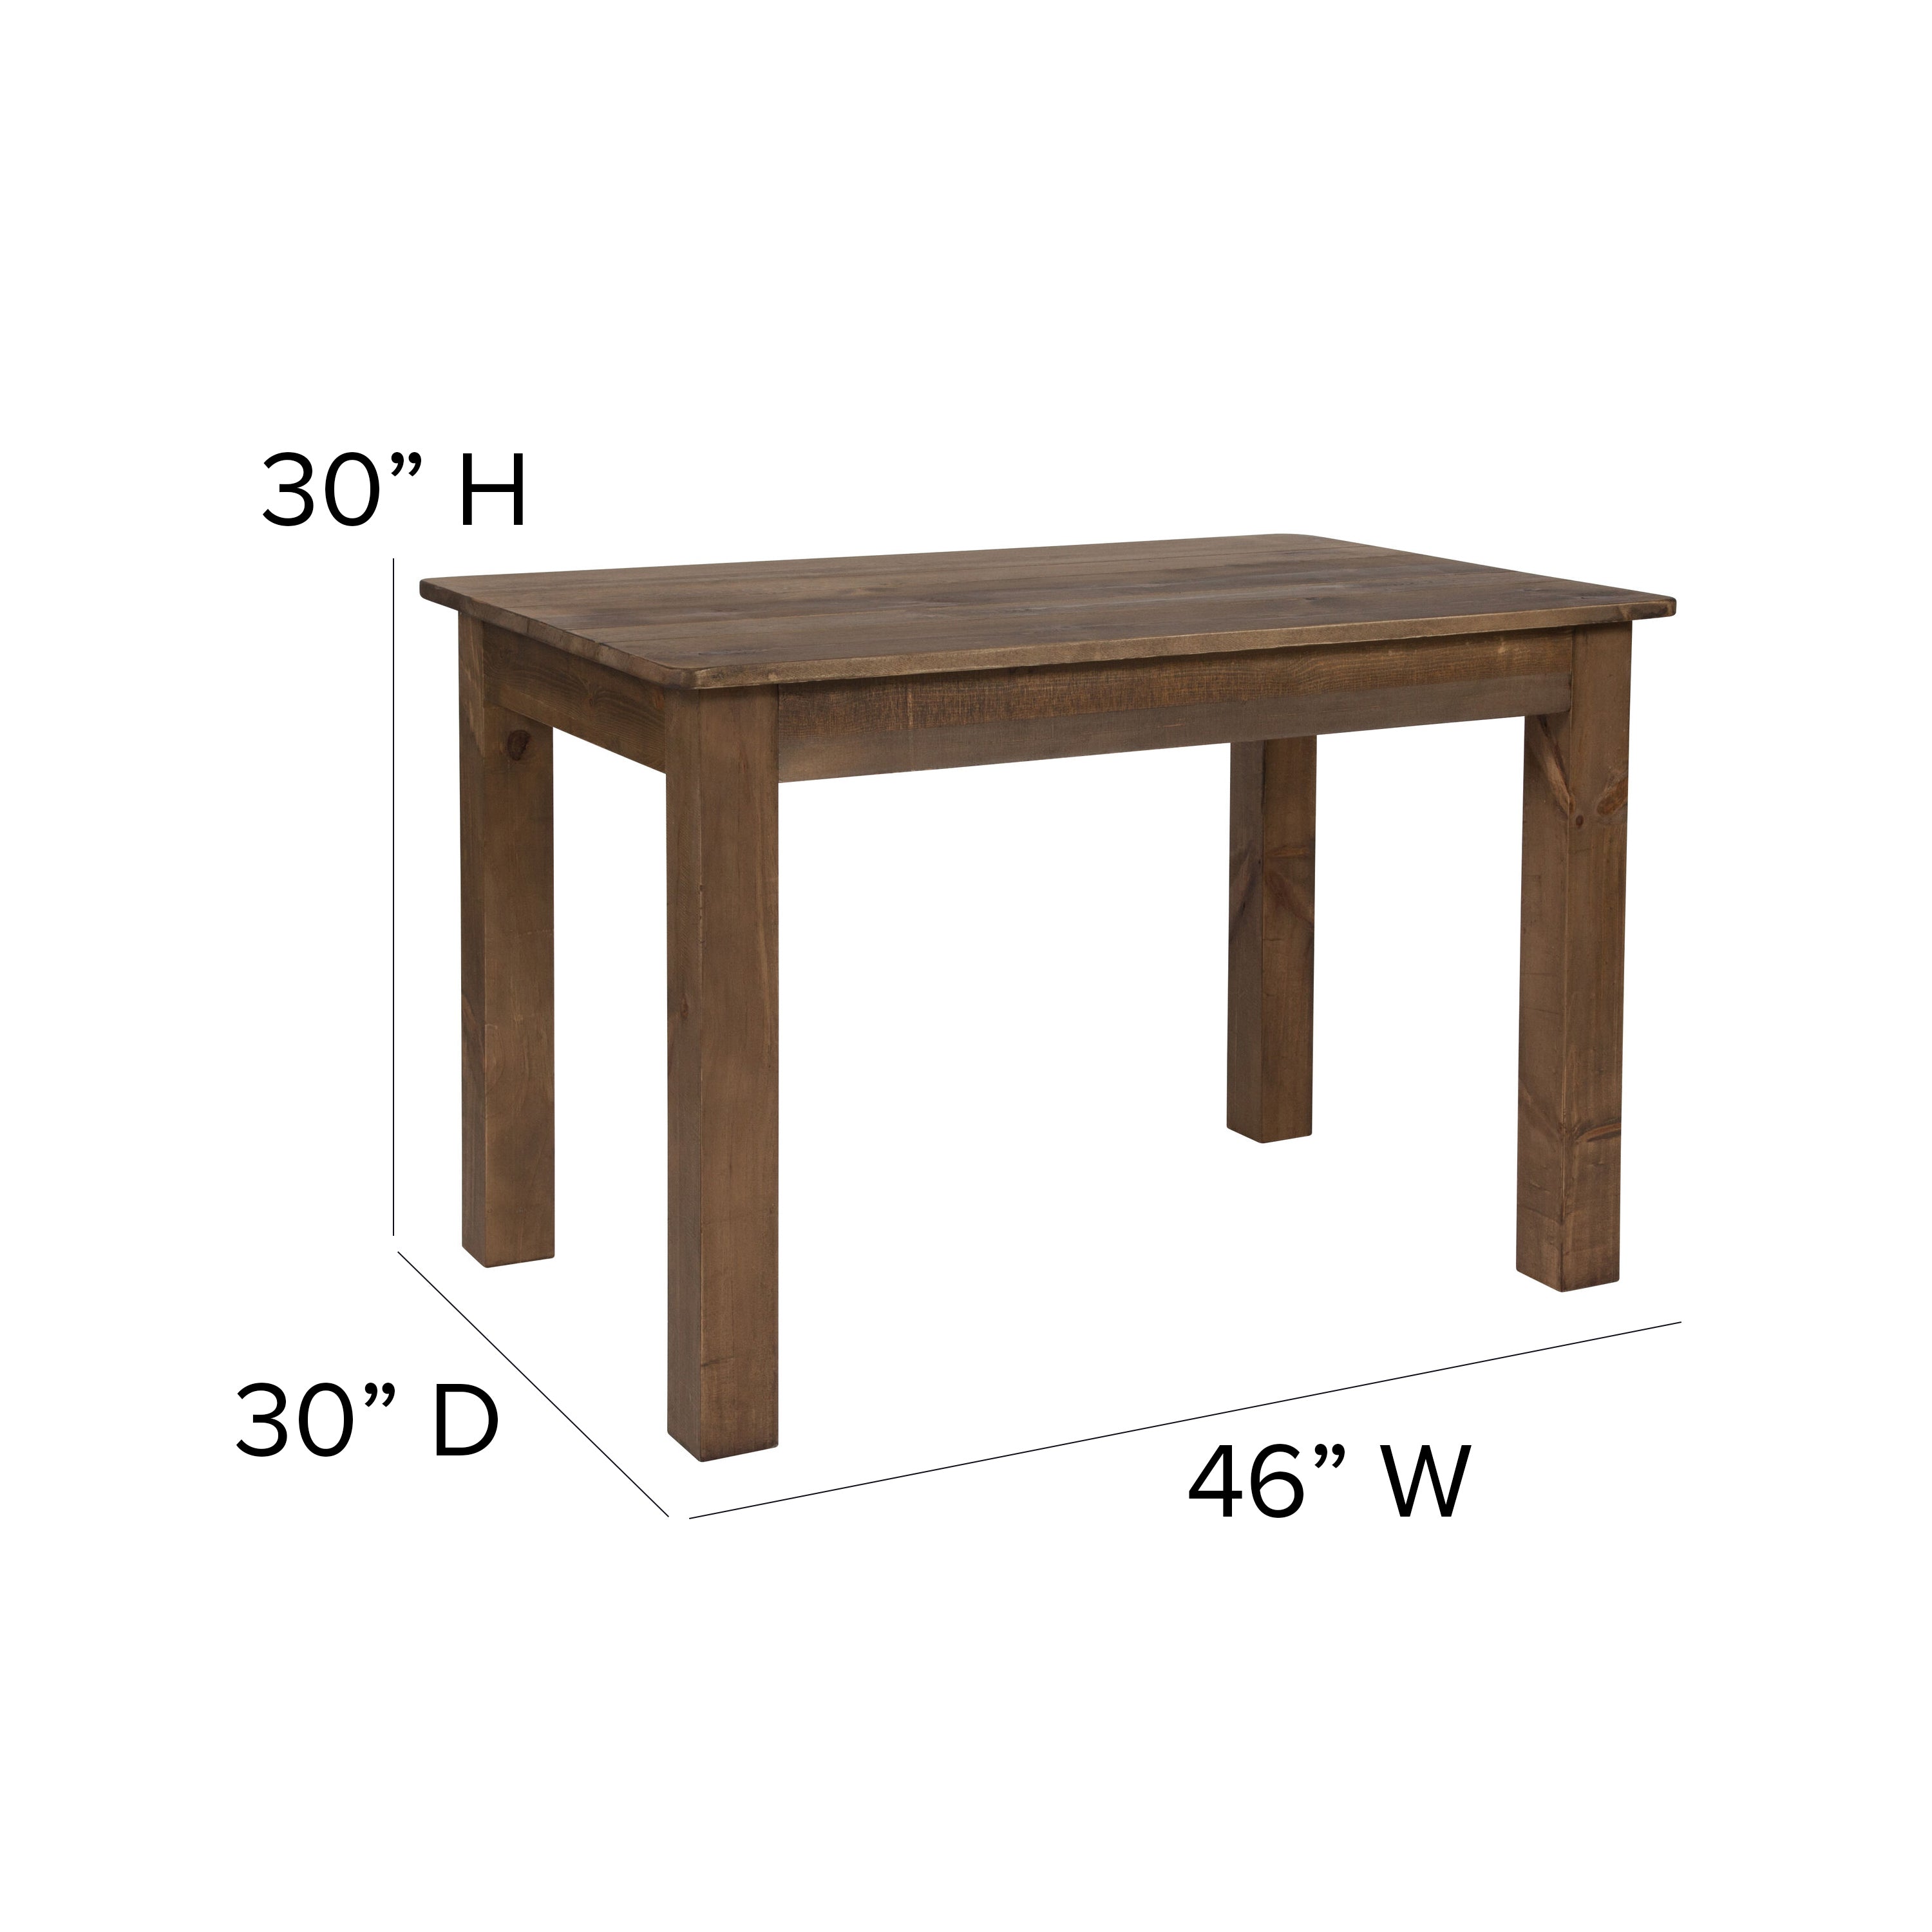 46" x 30" Rectangular Solid Pine Farm Dining Table-Dining Table-Flash Furniture-Wall2Wall Furnishings